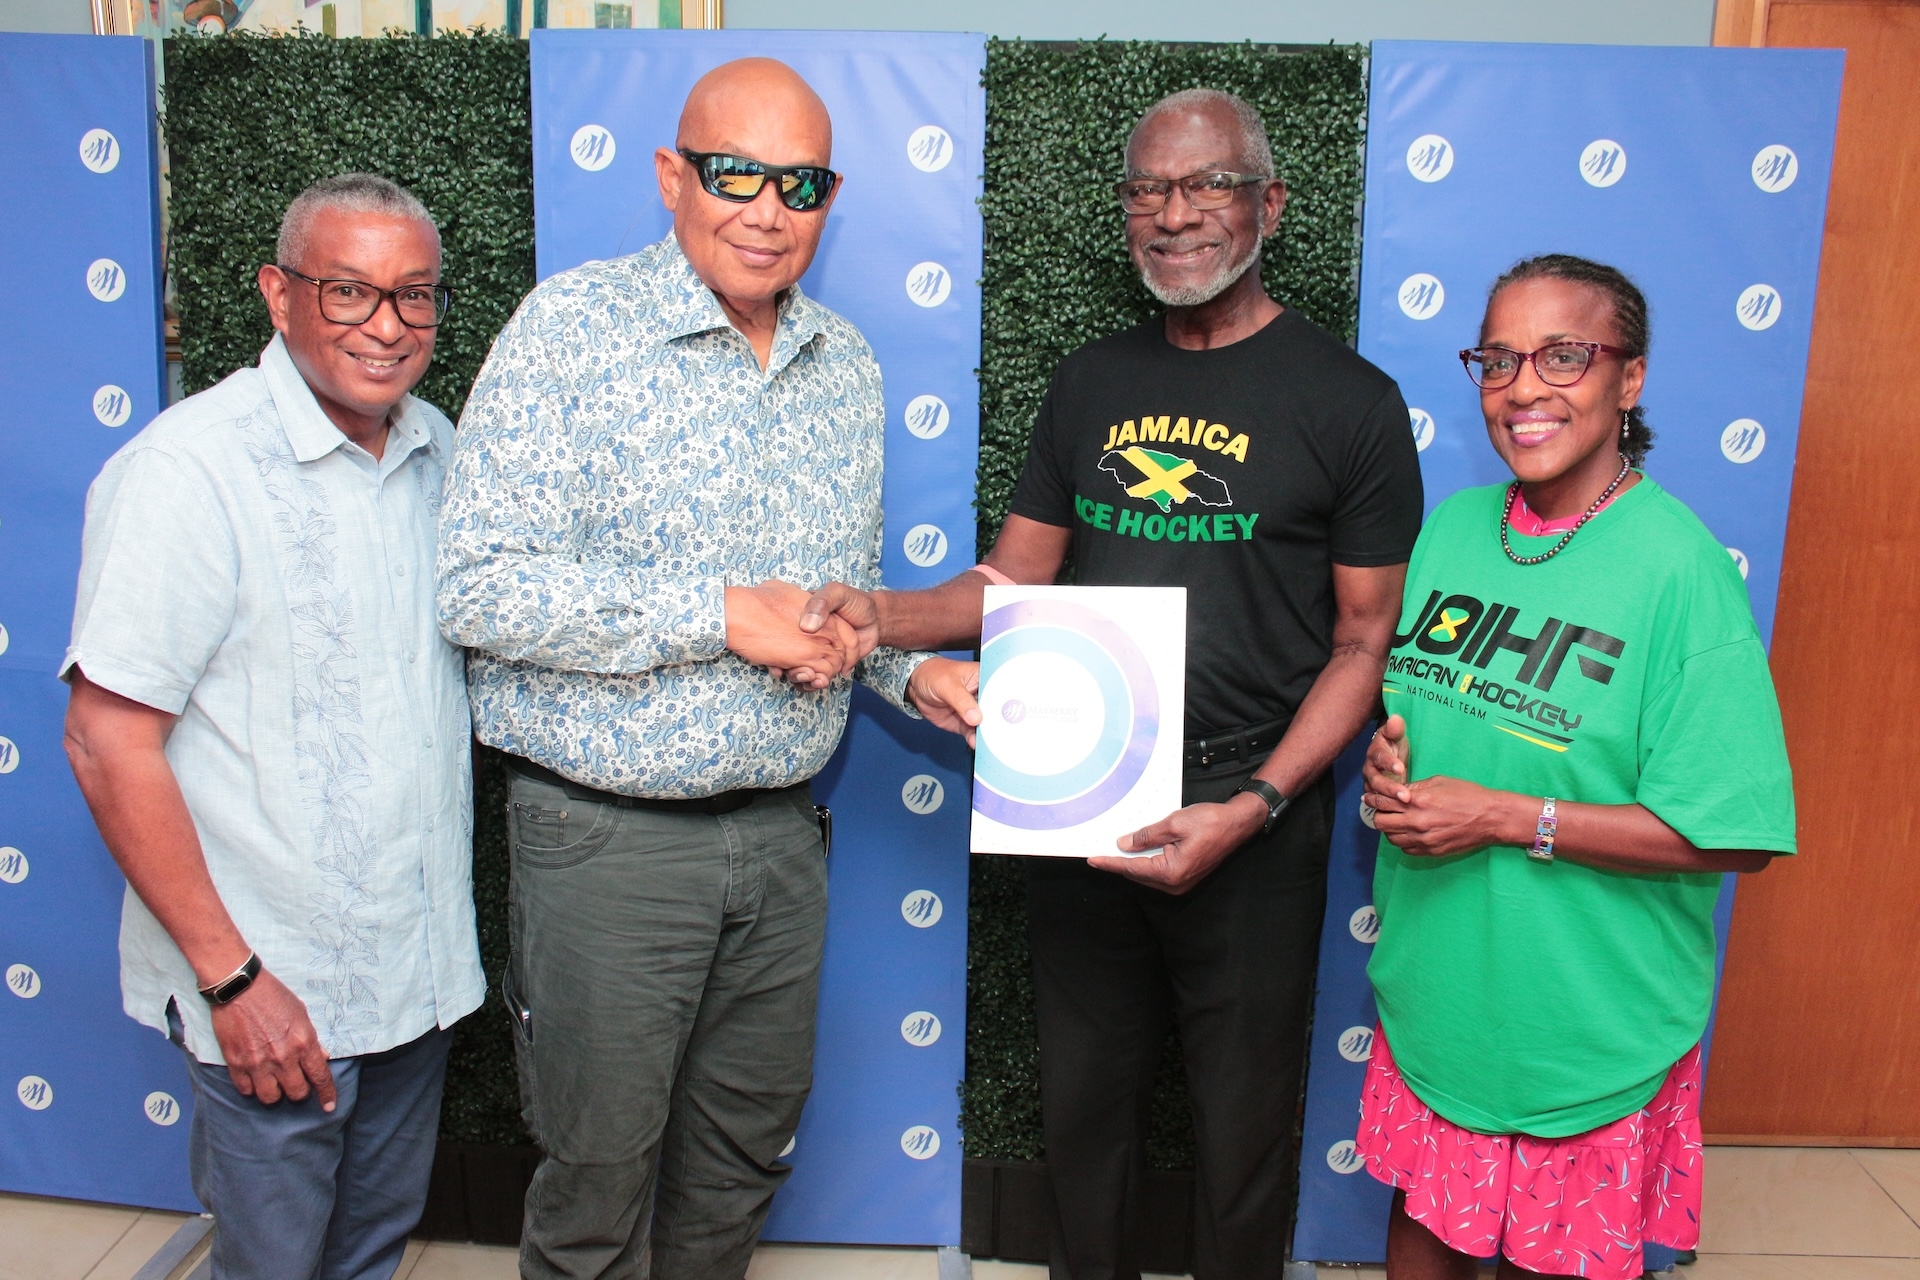 (from left to right) Konrad Mark Berry, Vice Chairman of Mayberry Investments, and Chris Berry, Executive Chairman of Mayberry Investments Limited, unite with Don Anderson, President of the Jamaican Olympic Ice Hockey Federation, and Dr. Denise Forrest, Director of the Jamaican Olympic Ice Hockey Federation, in a collaborative effort during the recent handover ceremony at Mayberry Investments Limited.